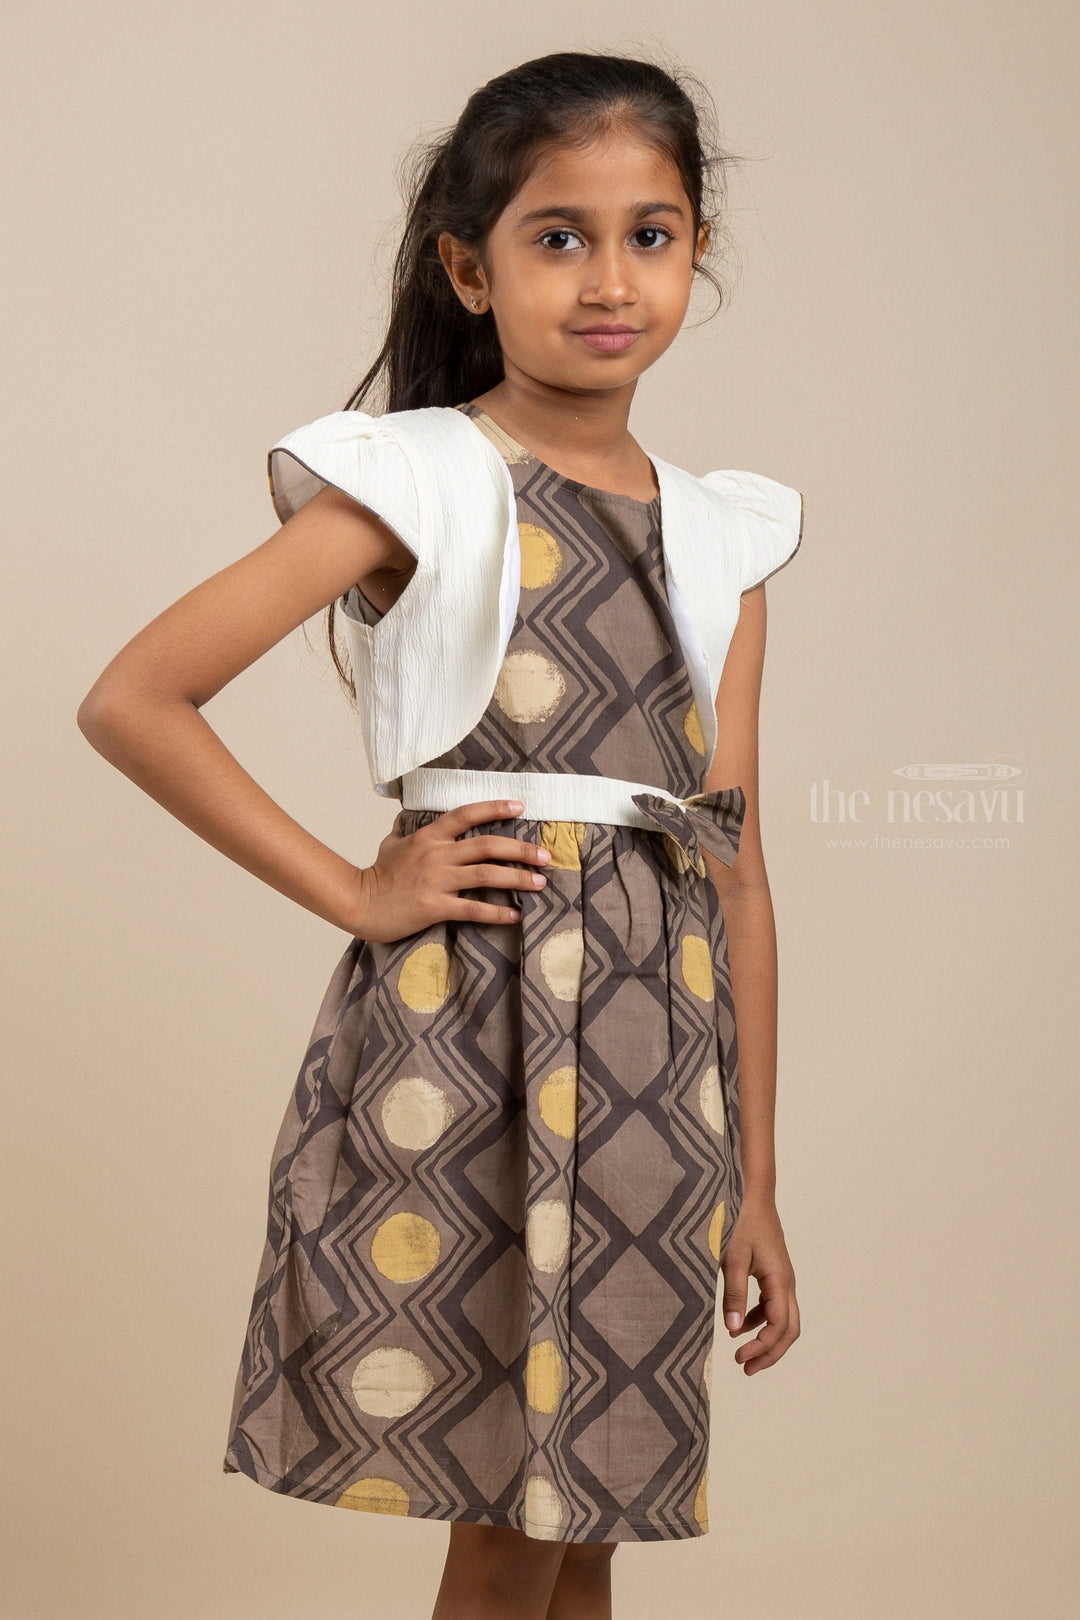 The Nesavu Girls Cotton Frock Daily Wear Casual Gown With White Overcoat And Bow Trim For Boys Nesavu Girls Play Wear Dresses | Festive Wear Ideas For Diwali 2022 | The Nesavu